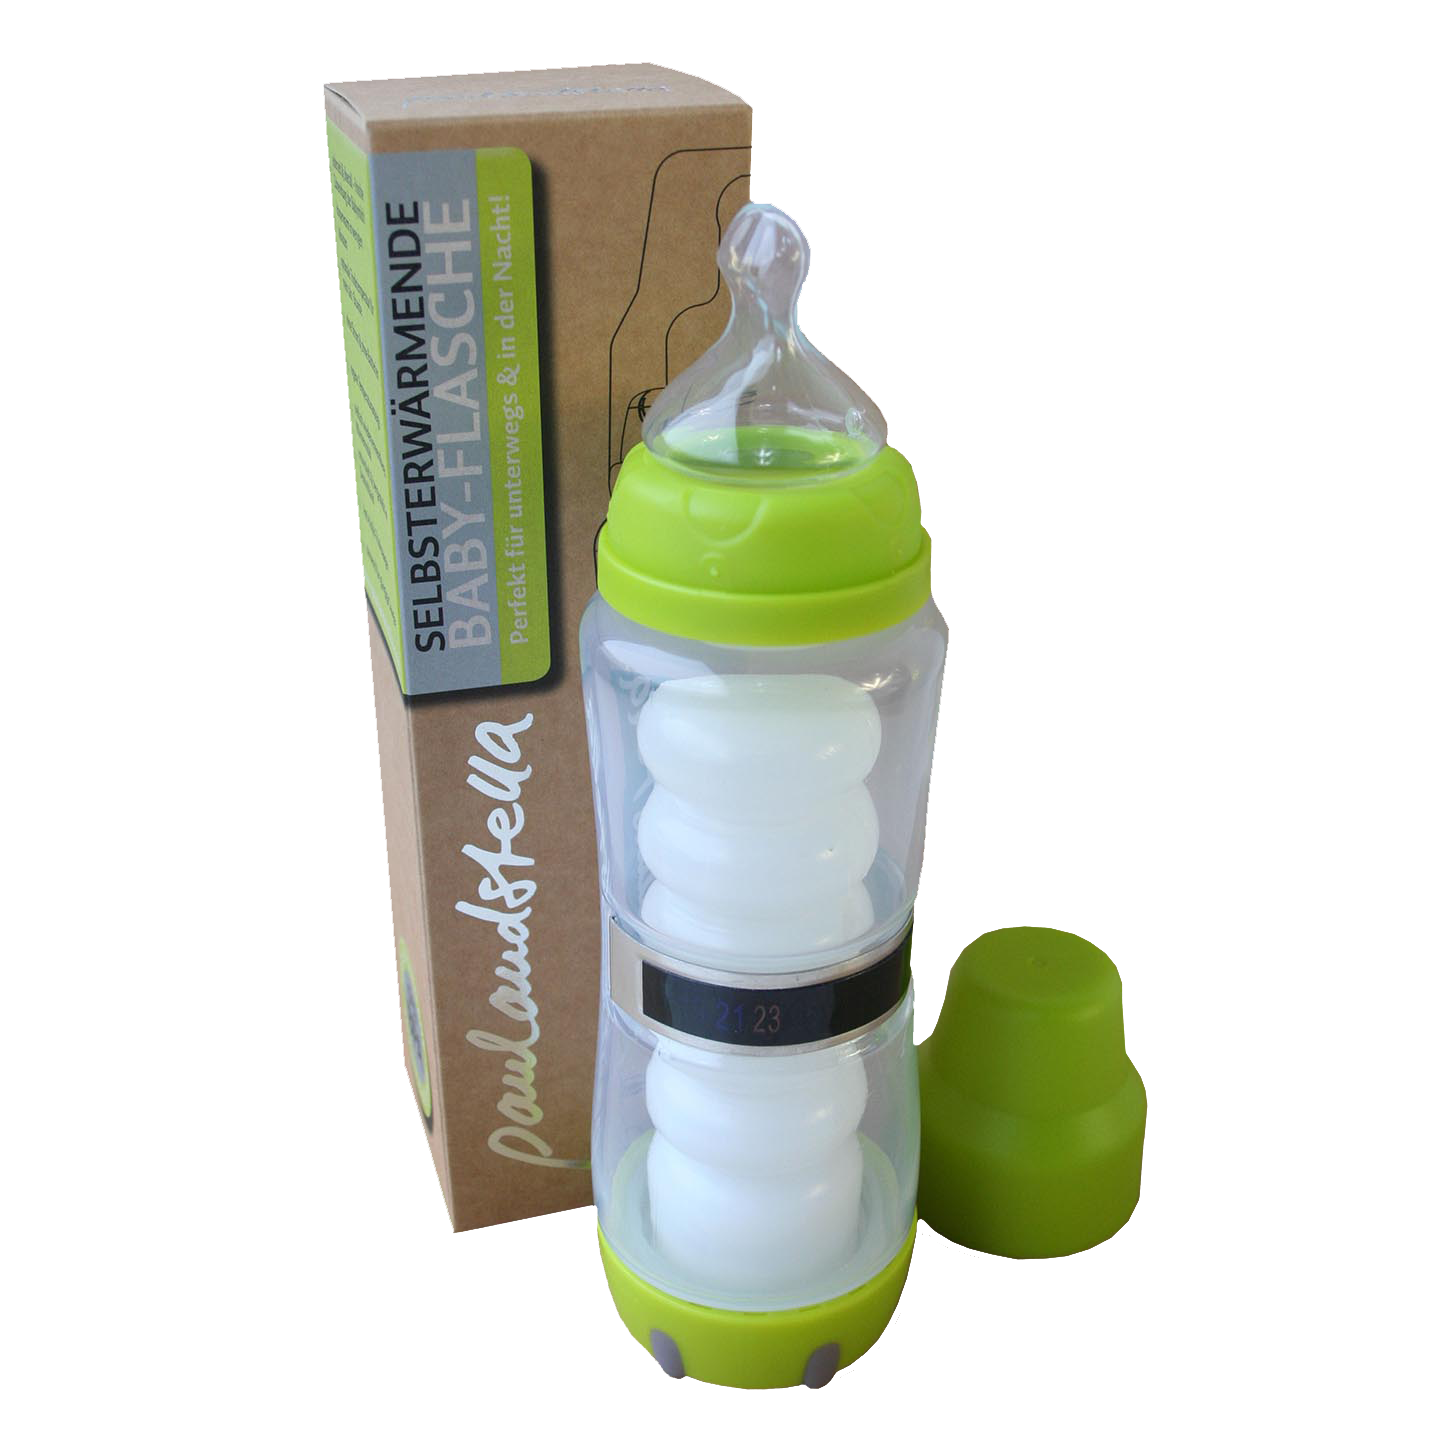 The self heating baby bottle that doesn't need batteries or electricity - it can heat milk anywhere, anytime and everytime!